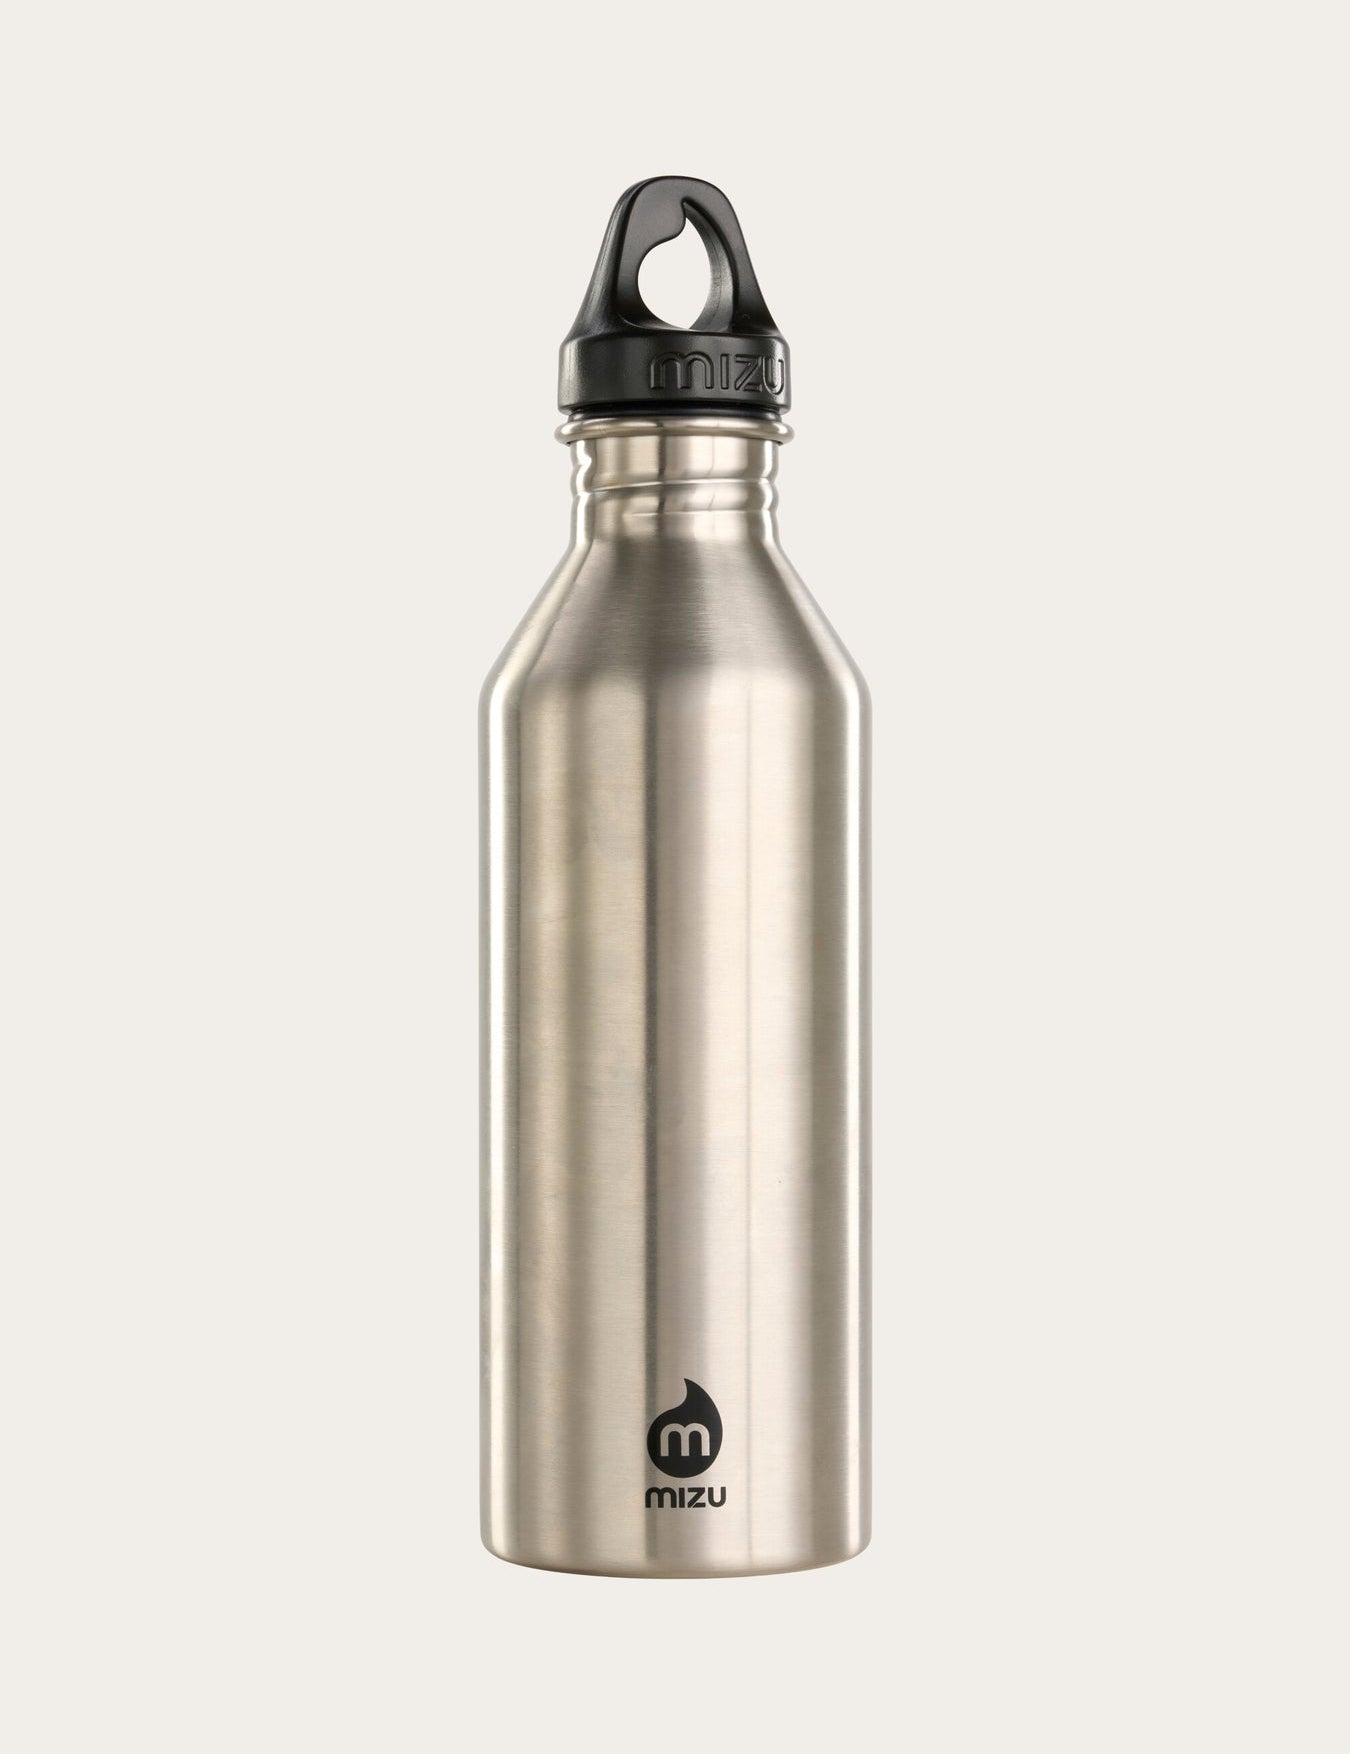 Stainless_steel_water_bottle-Accessories-82341-9999_Item_Colour-1_1350x1800_5d8c2e4e-97be-4e2c-beaa-7d6190afbbfd.jpg